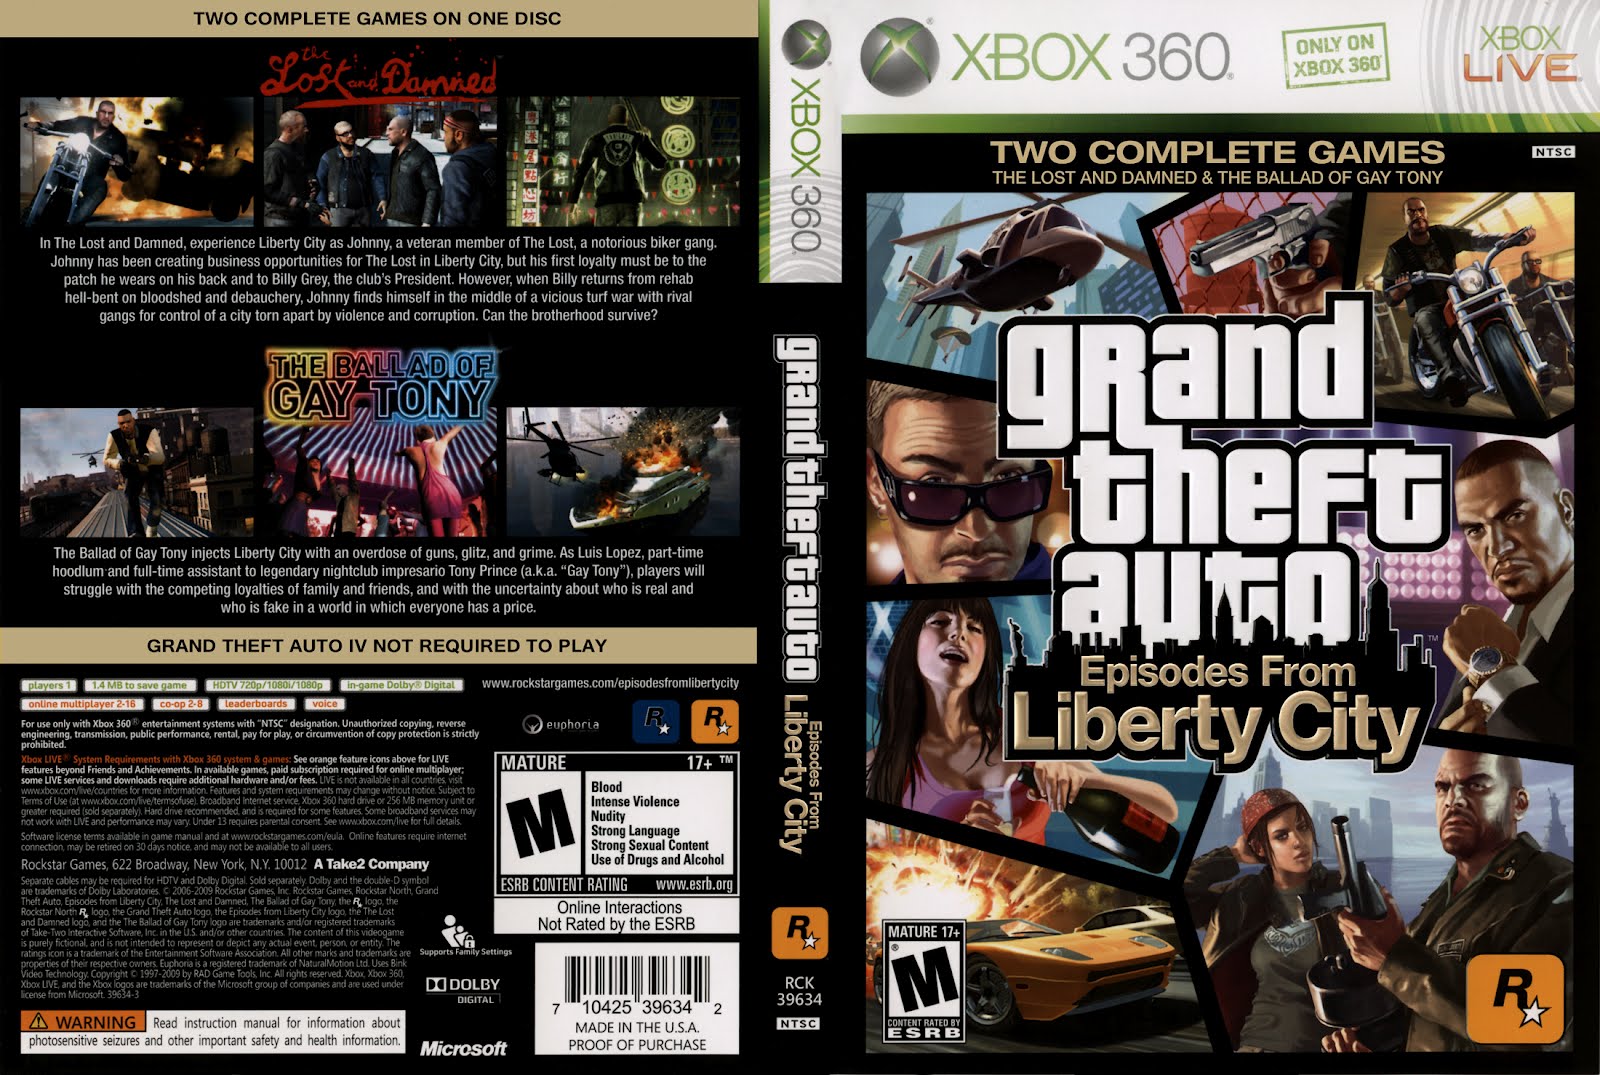 grand theft auto iv episodes from liberty city